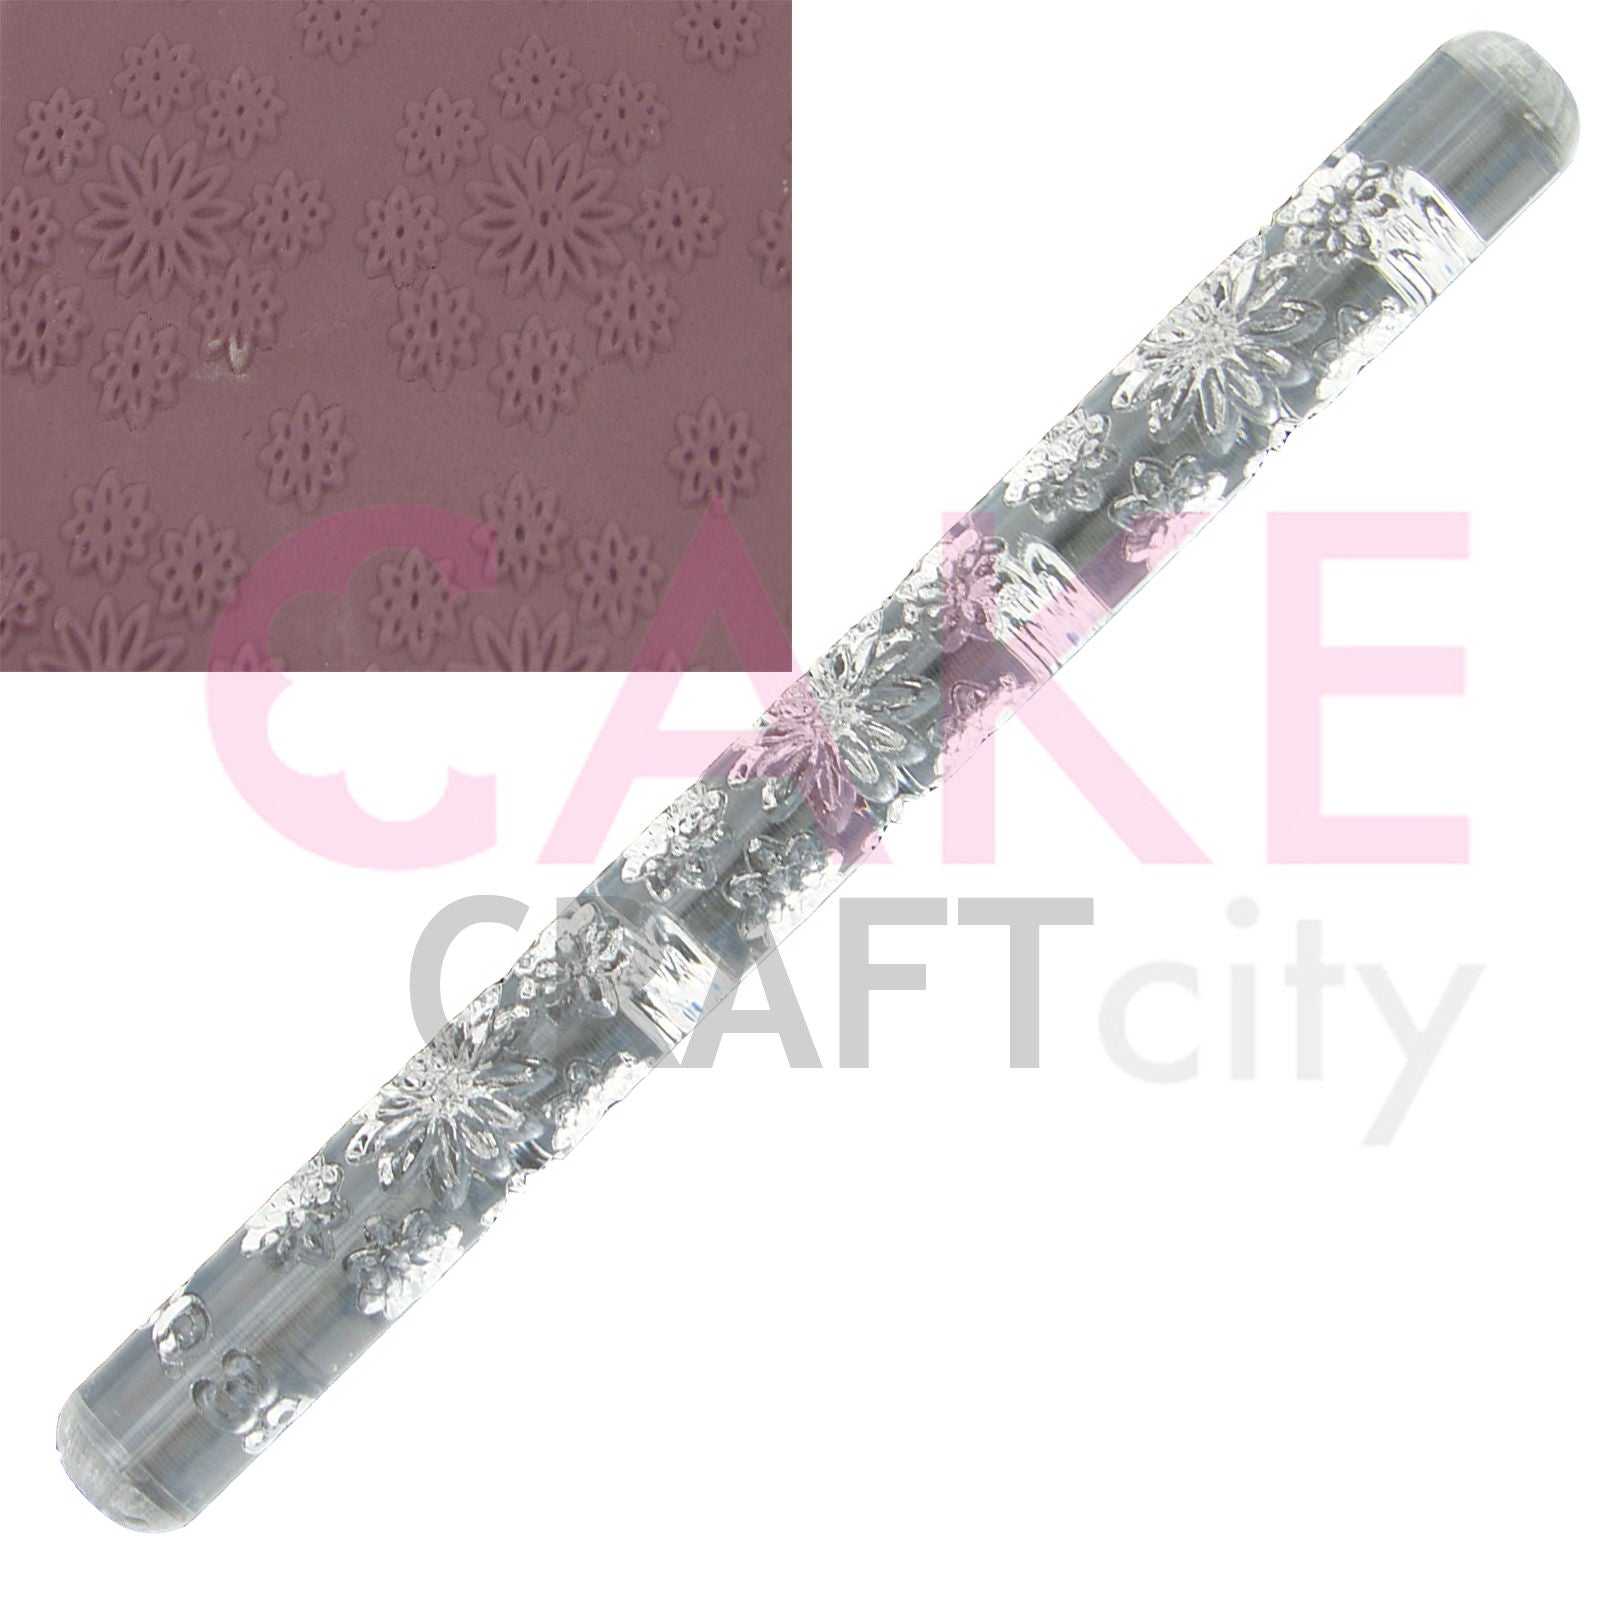 Daisy Flower effect Texture Embossing Acrylic Rolling Pin cake decorating